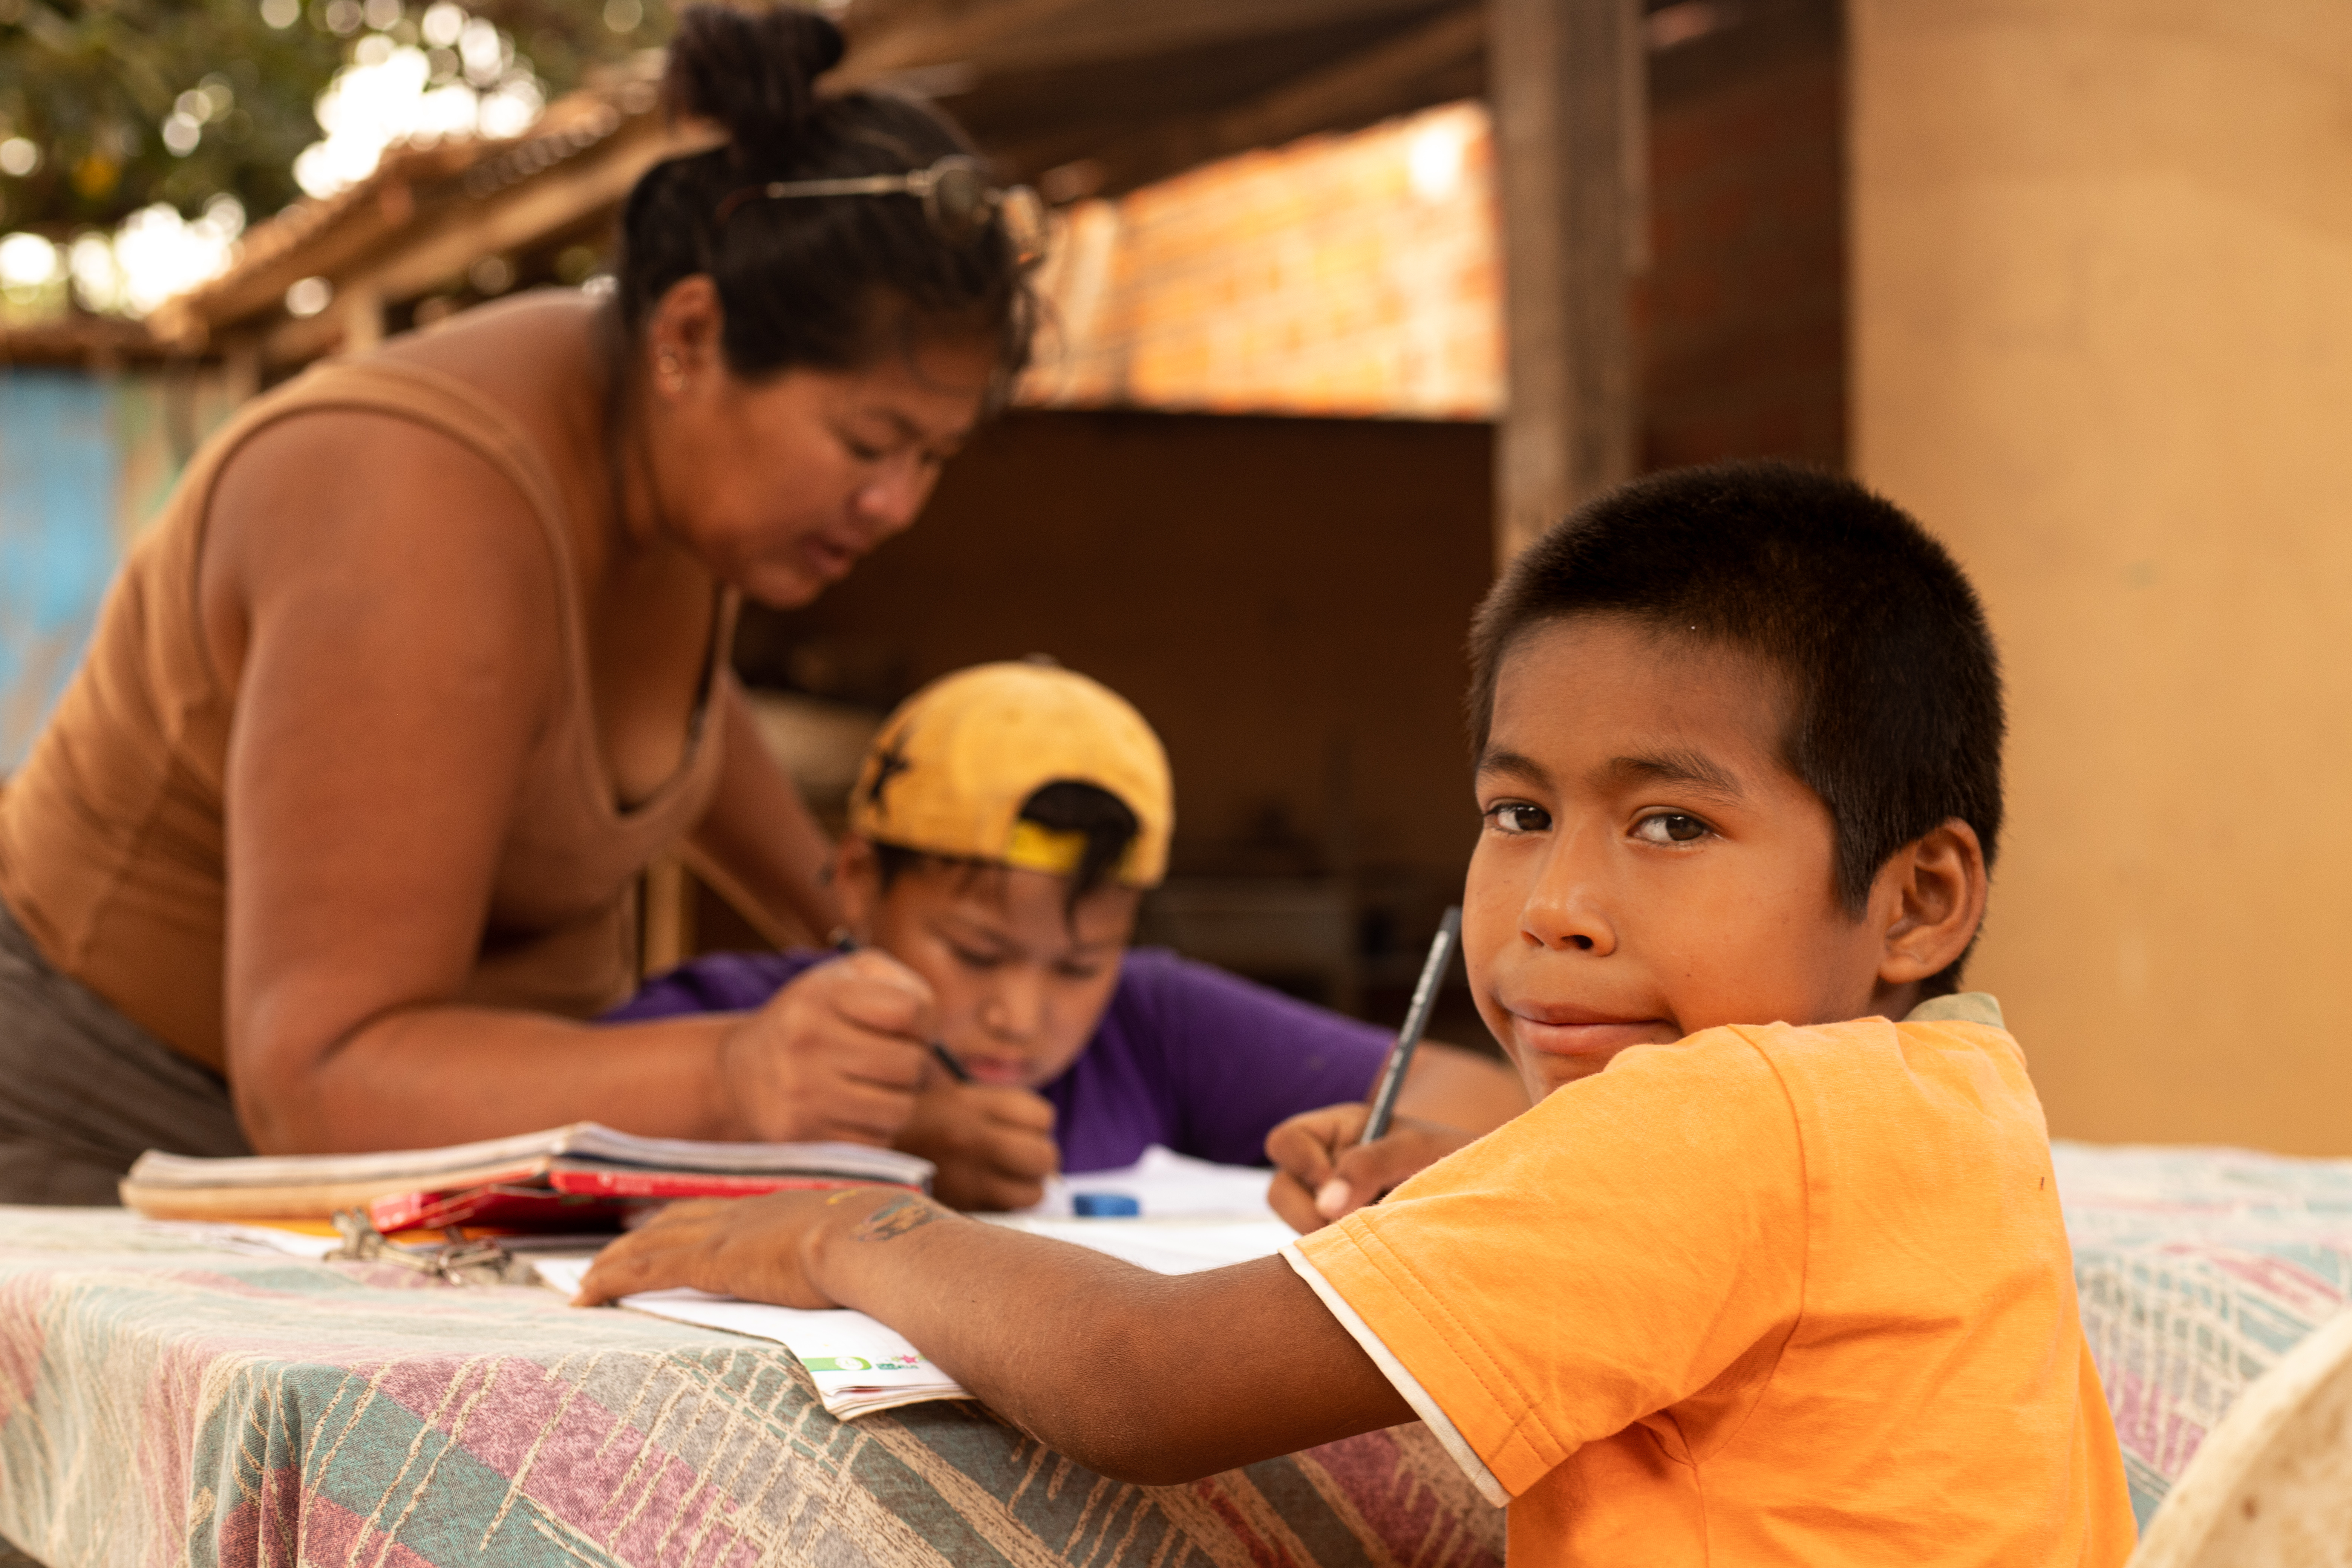 Boy in Bolivia does his school work on a table while his mother helps his brother to complete his, not allowing coronavirus to de-rail his education